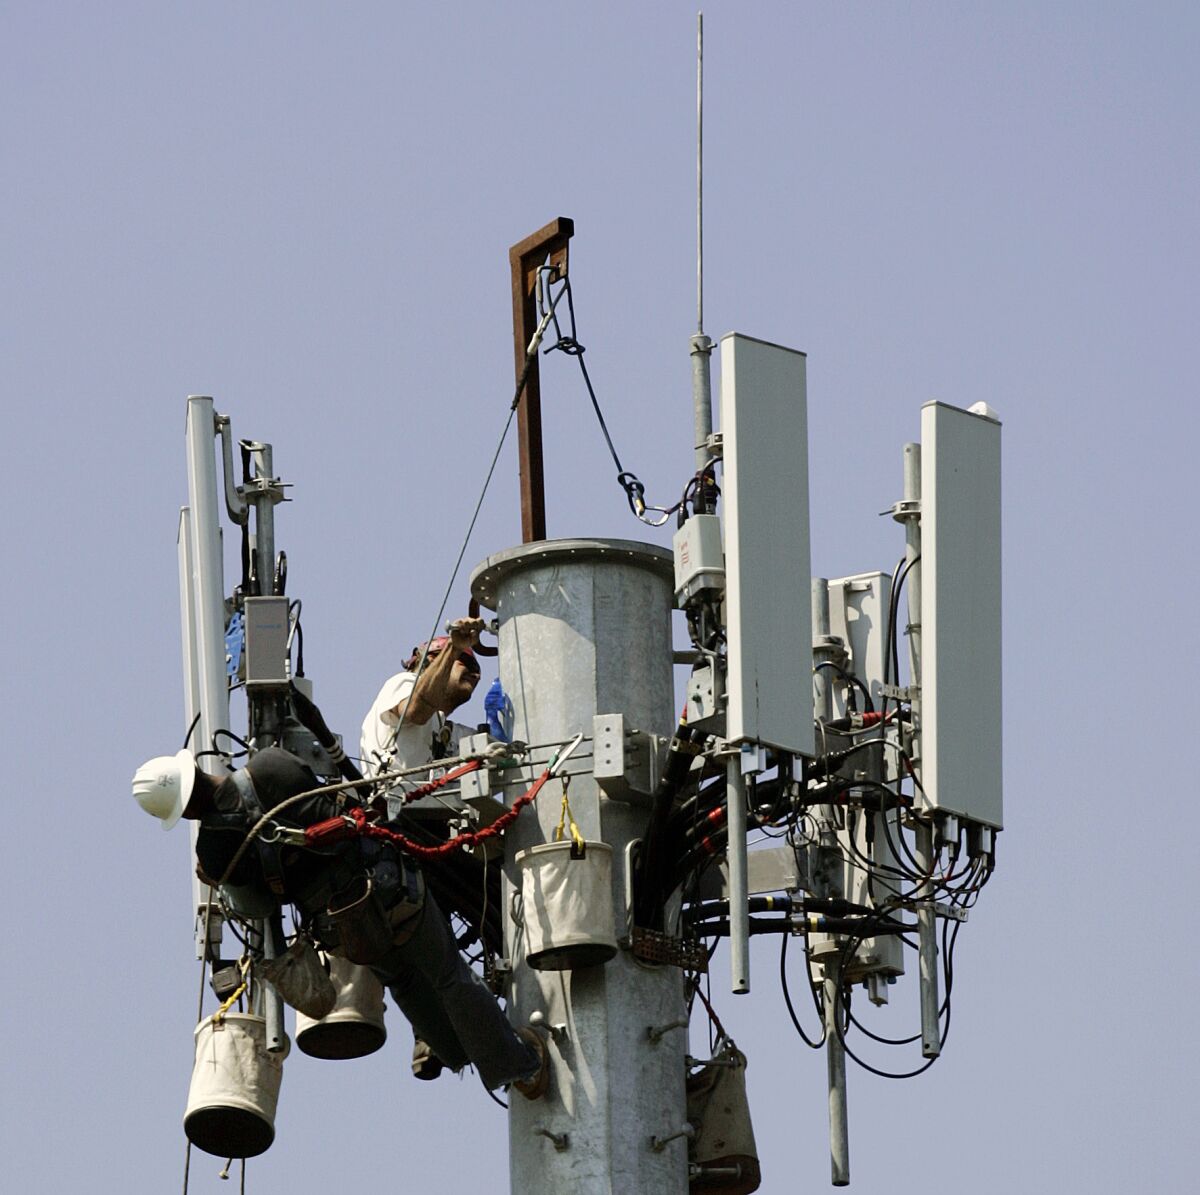 Workers are seen at the construction of a cellular telephone antenna tower.